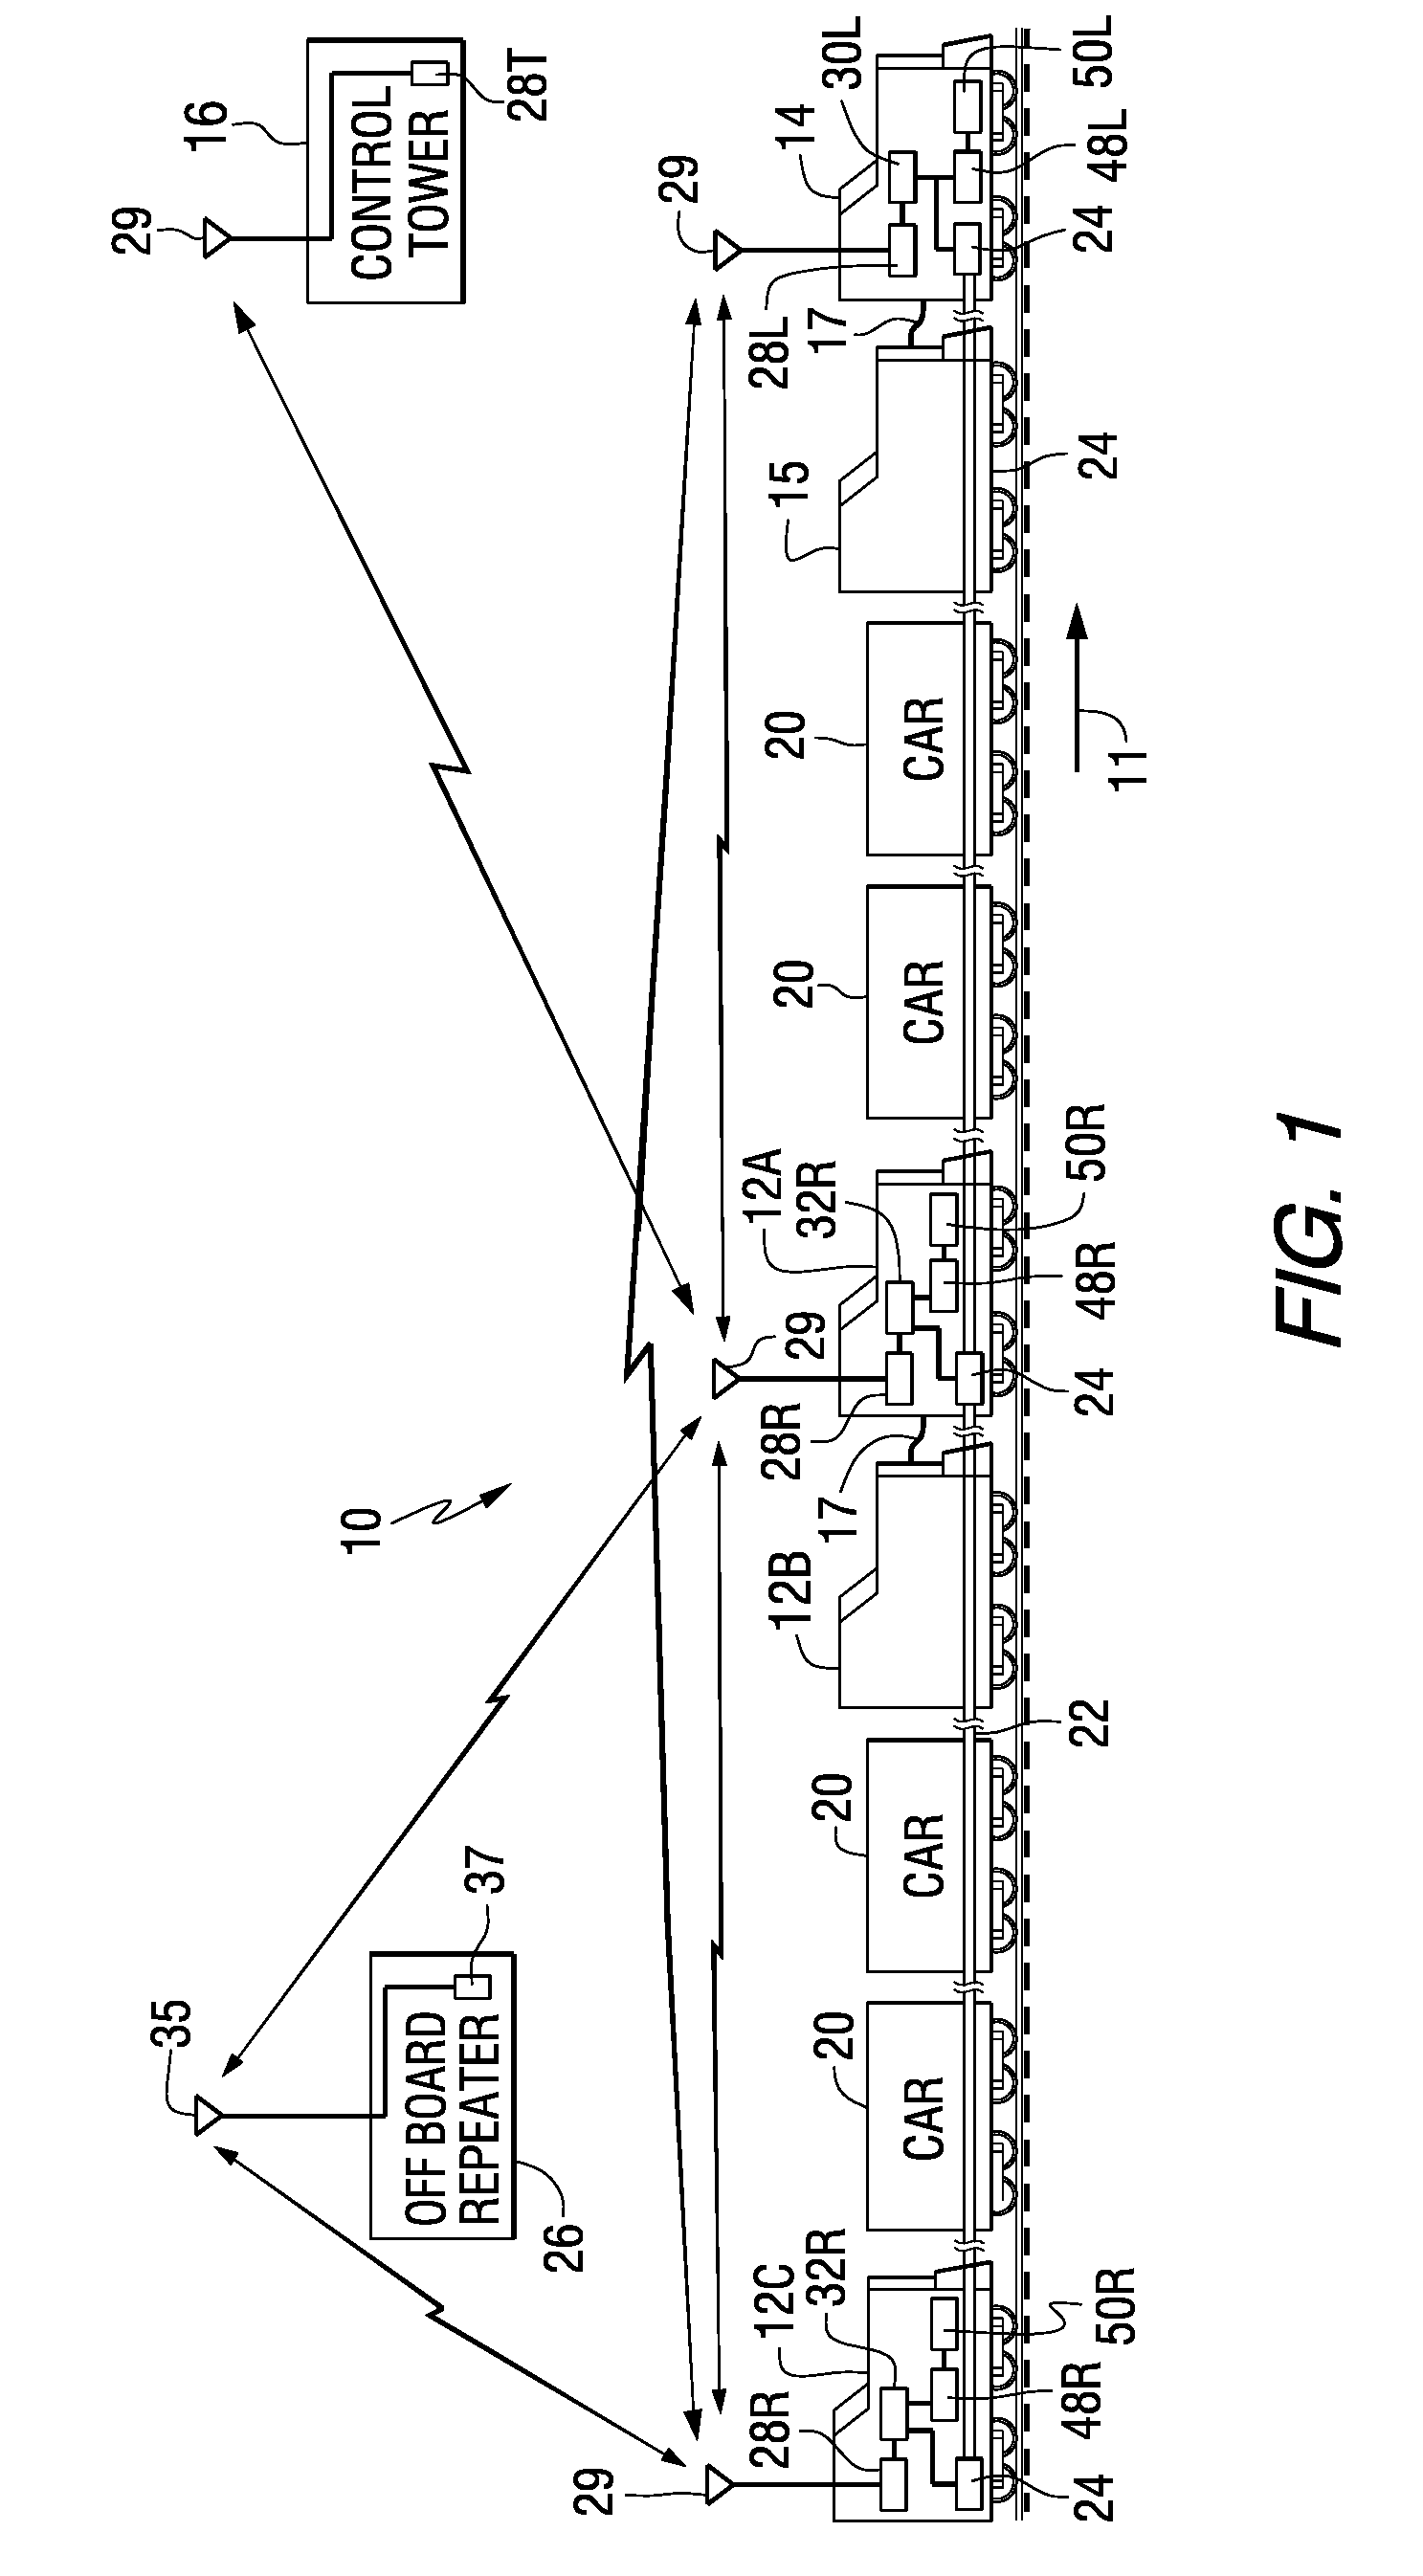 Method and system for using location information in conjunction with recorded operating information for a railroad train